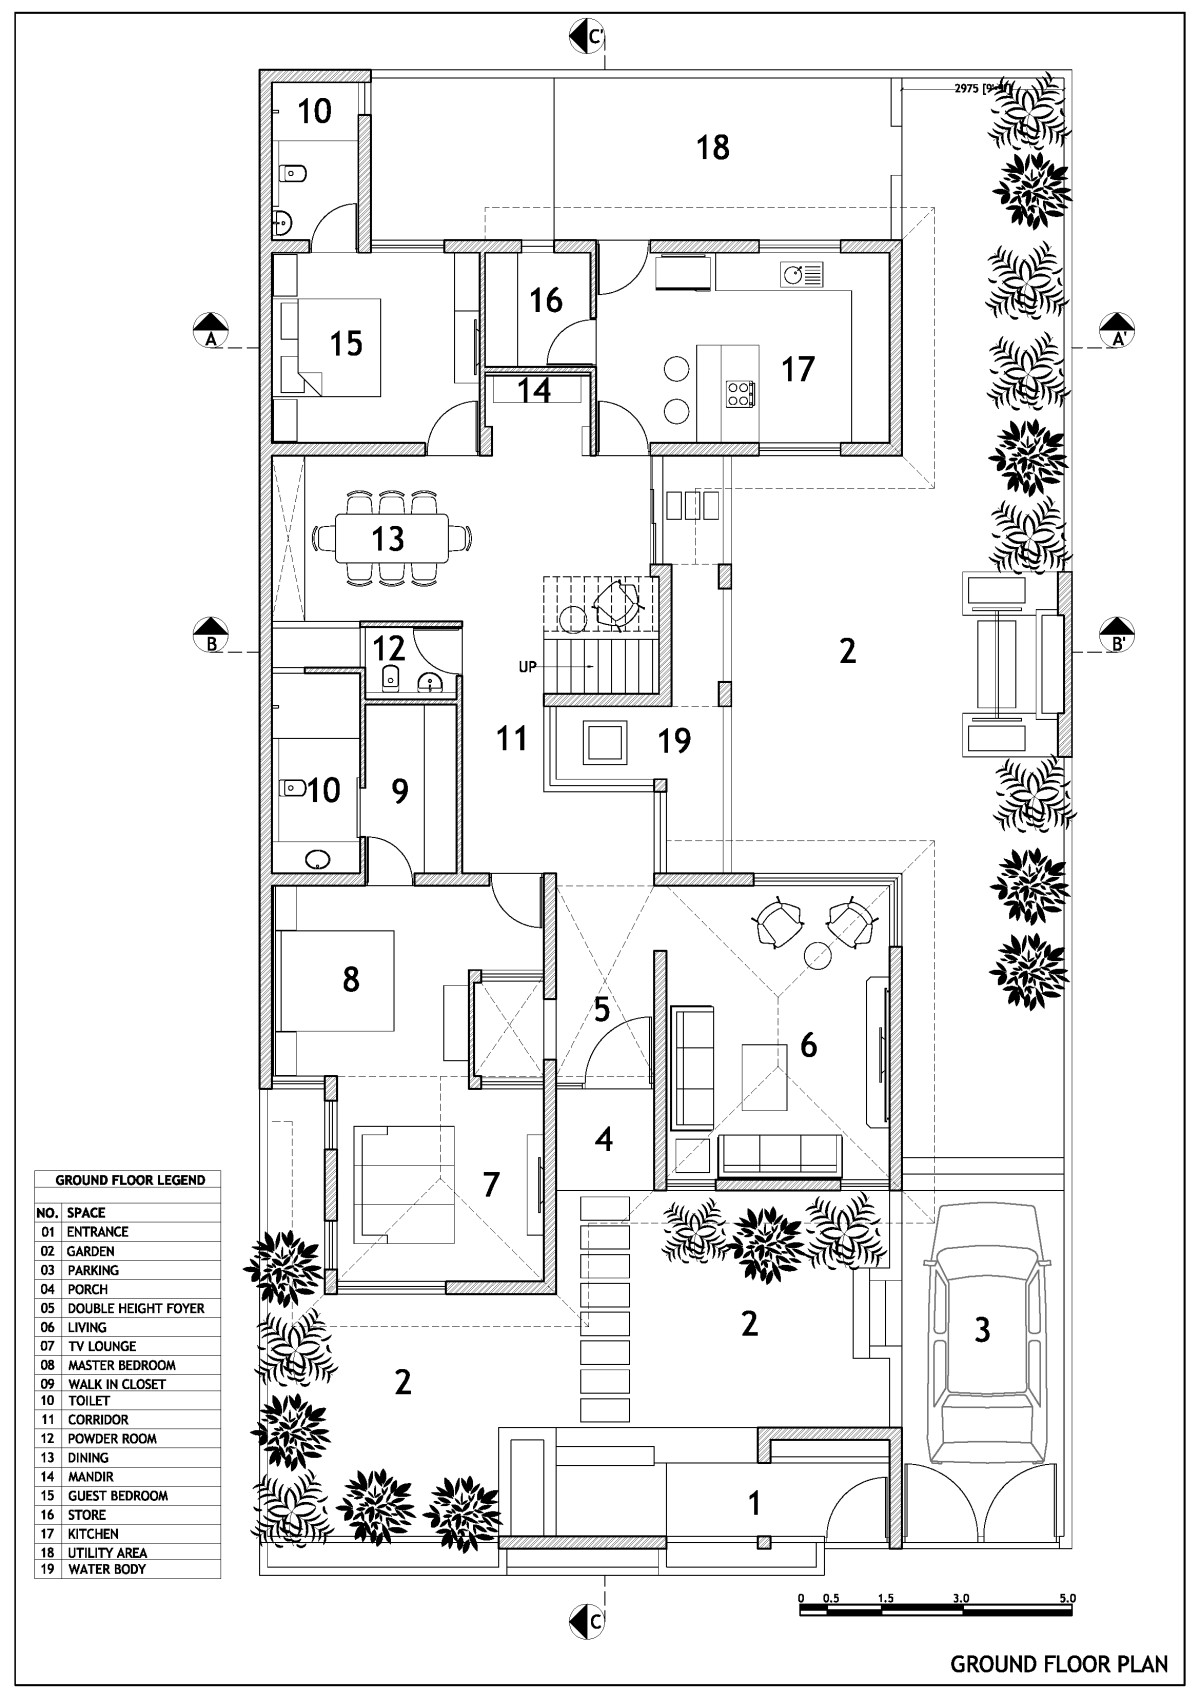 Ground Floor Plan of Pujara House by Flamingo Architects + Nidhi Thacker and Associates